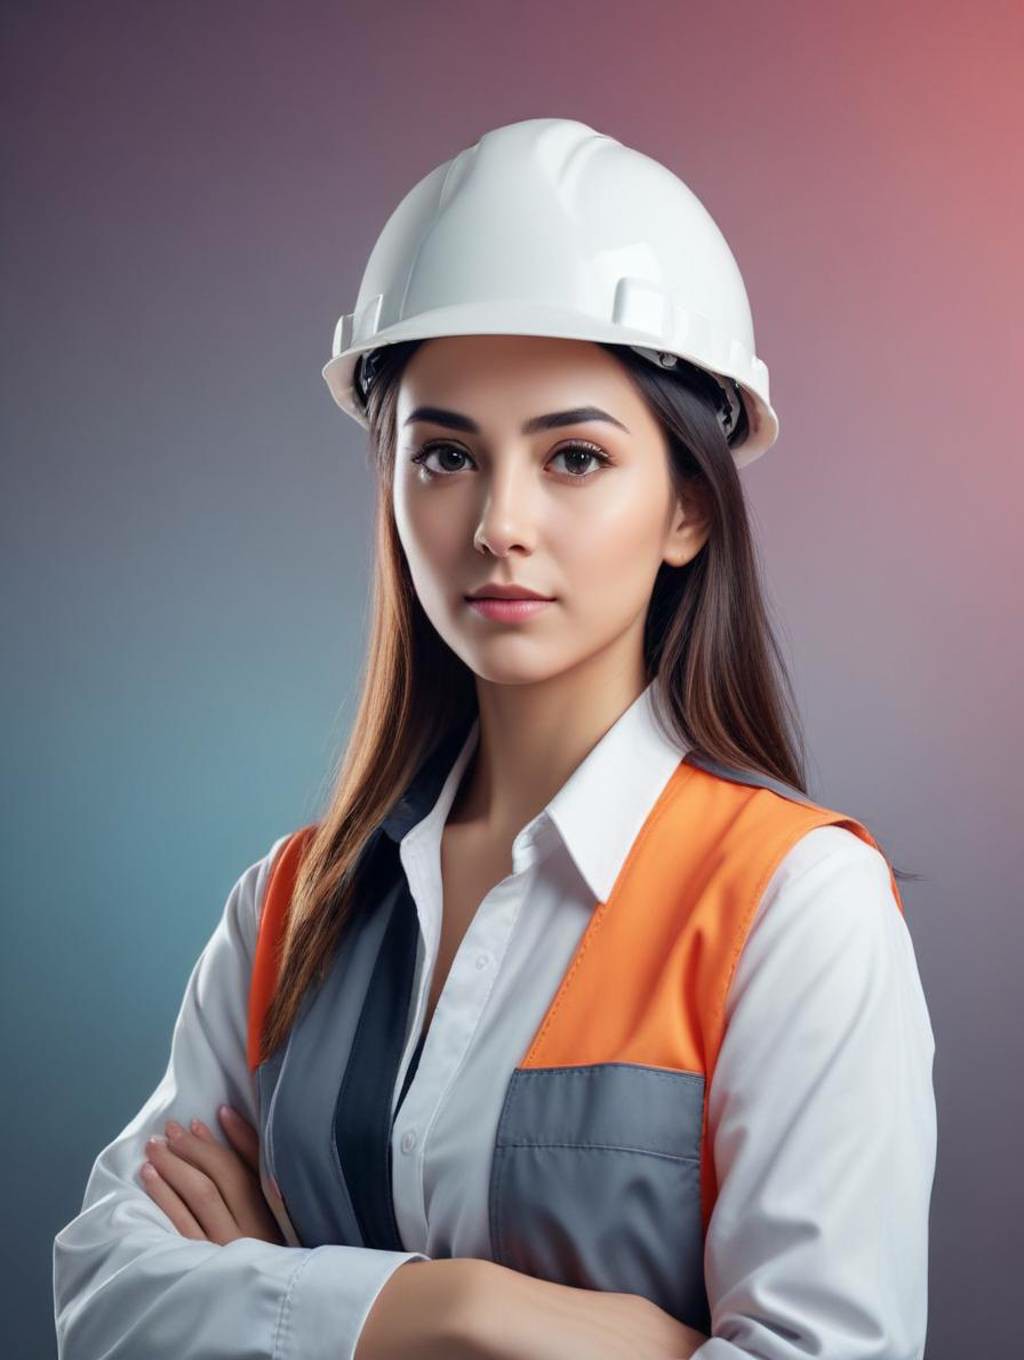 Engineers Women: Gallery Frames & Portrait Photography-Theme:6